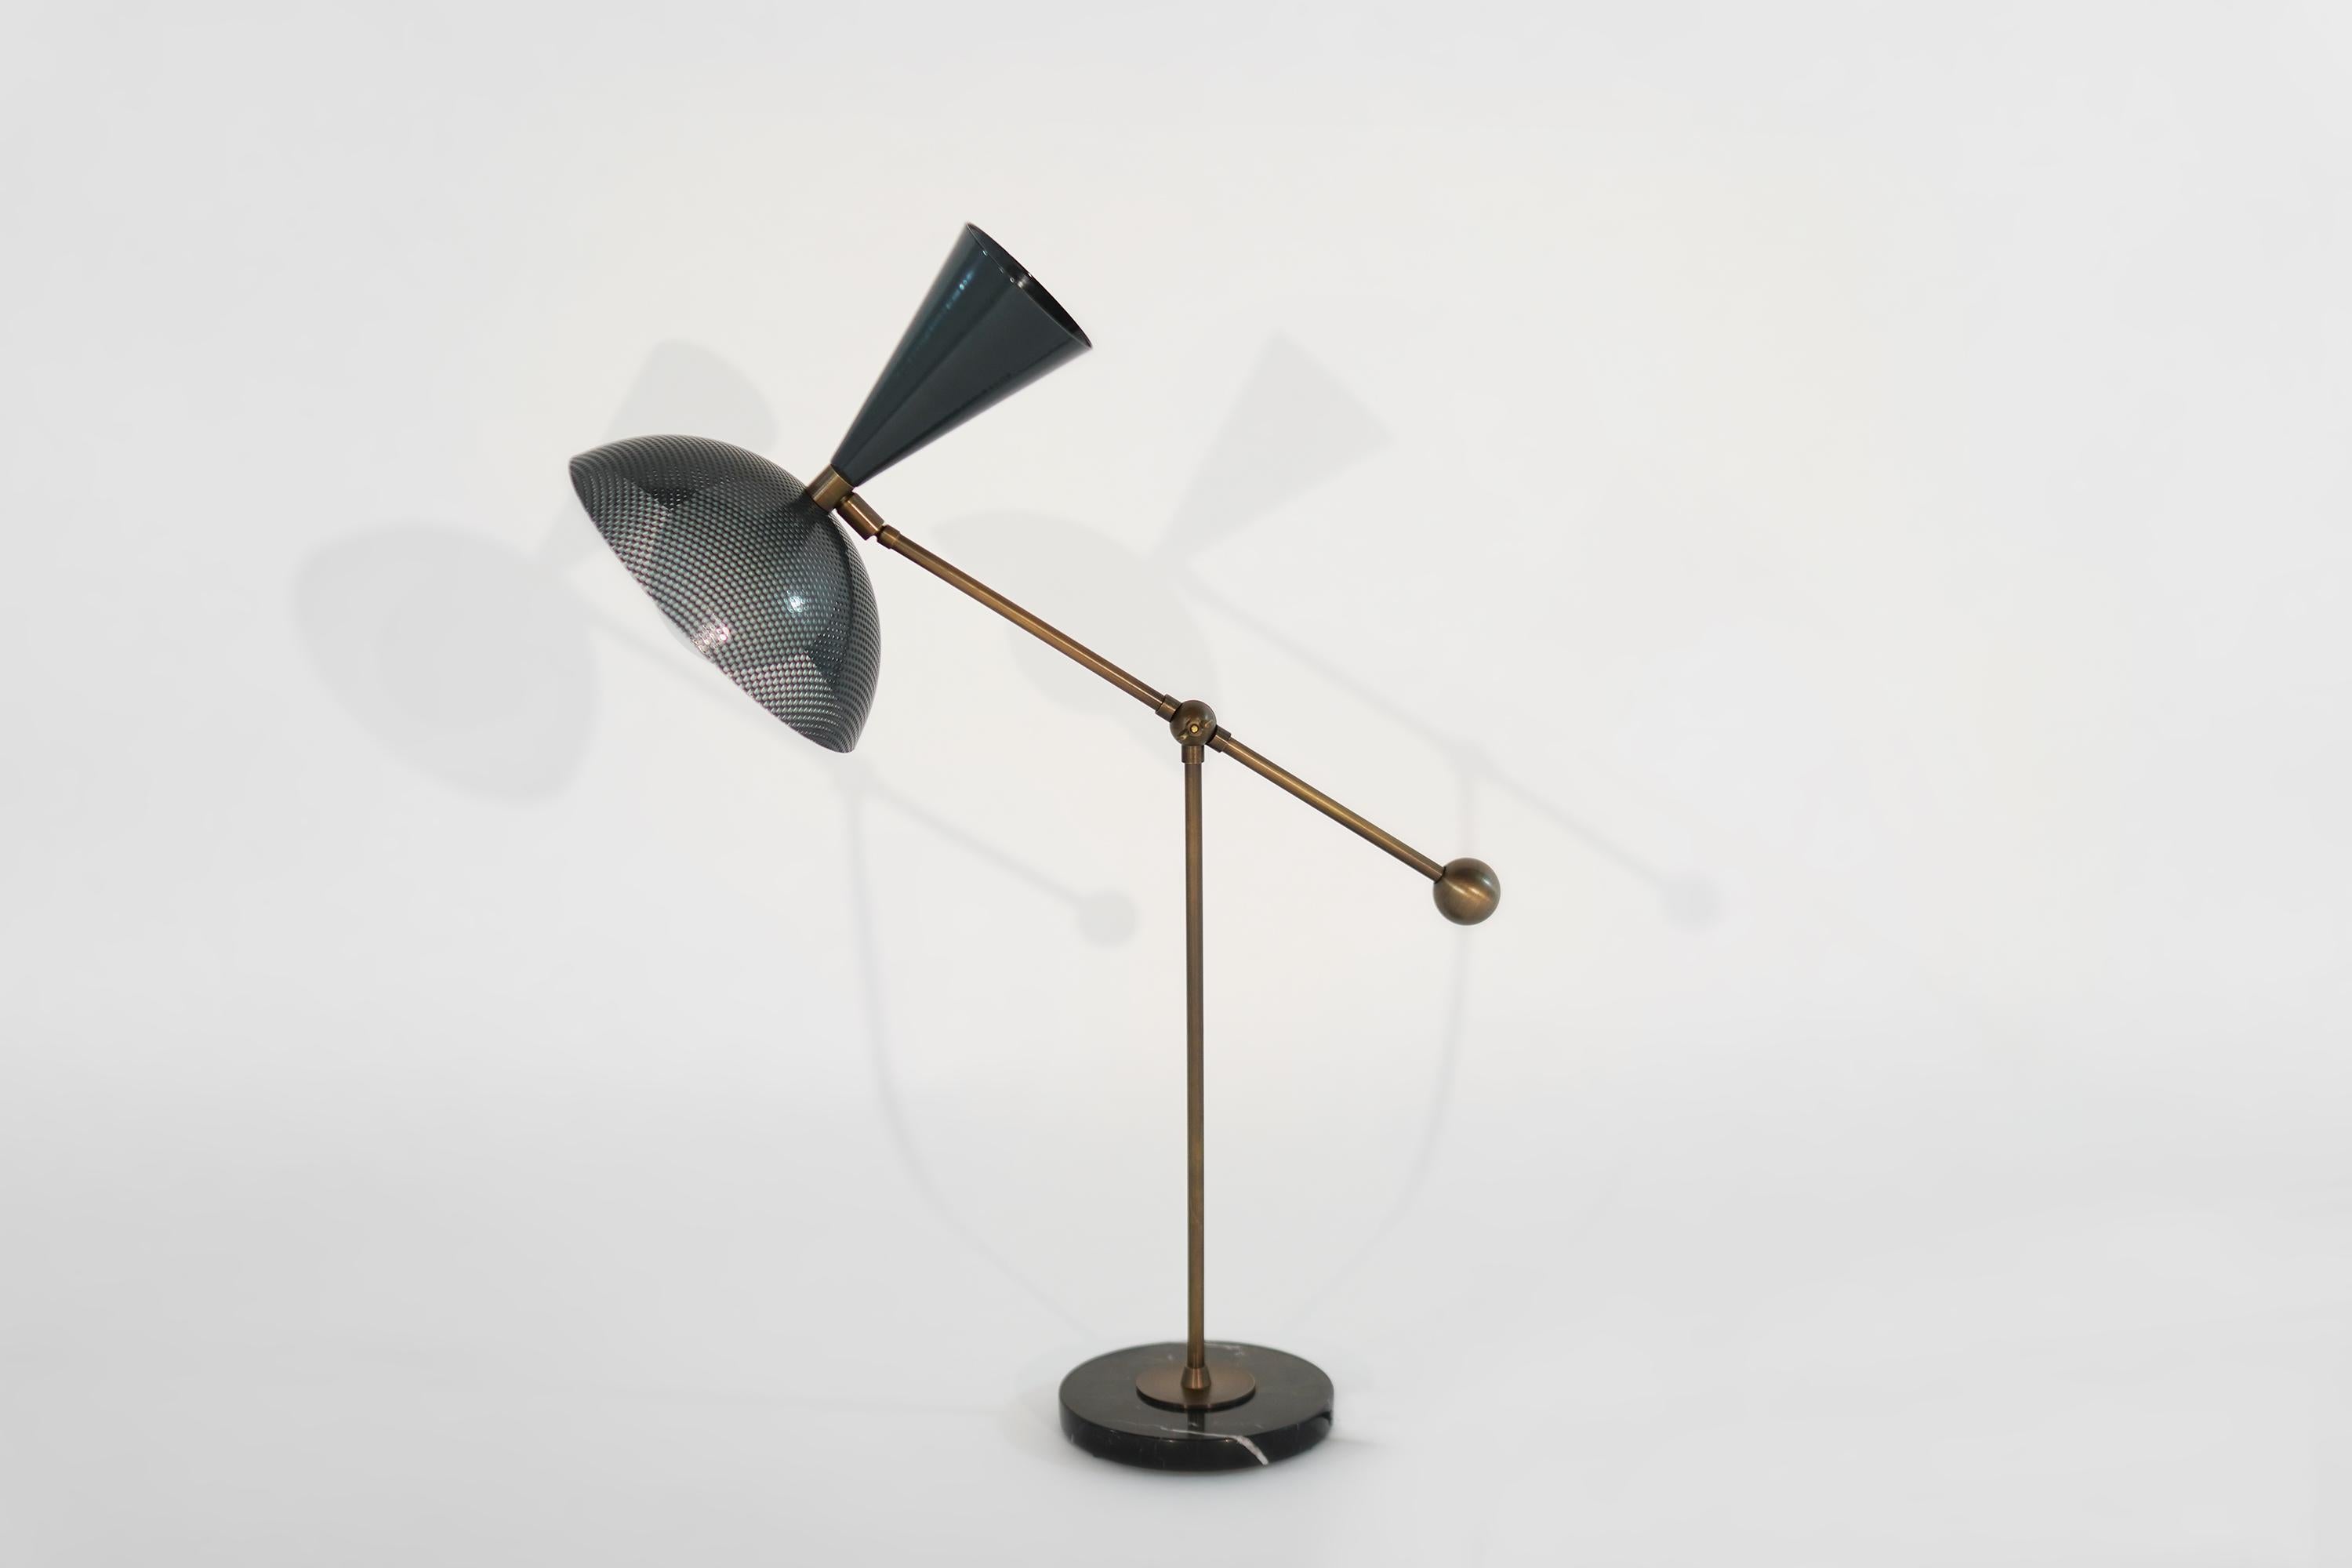 The Molto table lamp or desk lamp is a fresh, new take on Italian modernism, featuring a spun-metal mesh shade, brass counterweight, and a heavy black marble base. This lamp articulates in two places: the arm joint moves up and down and has a